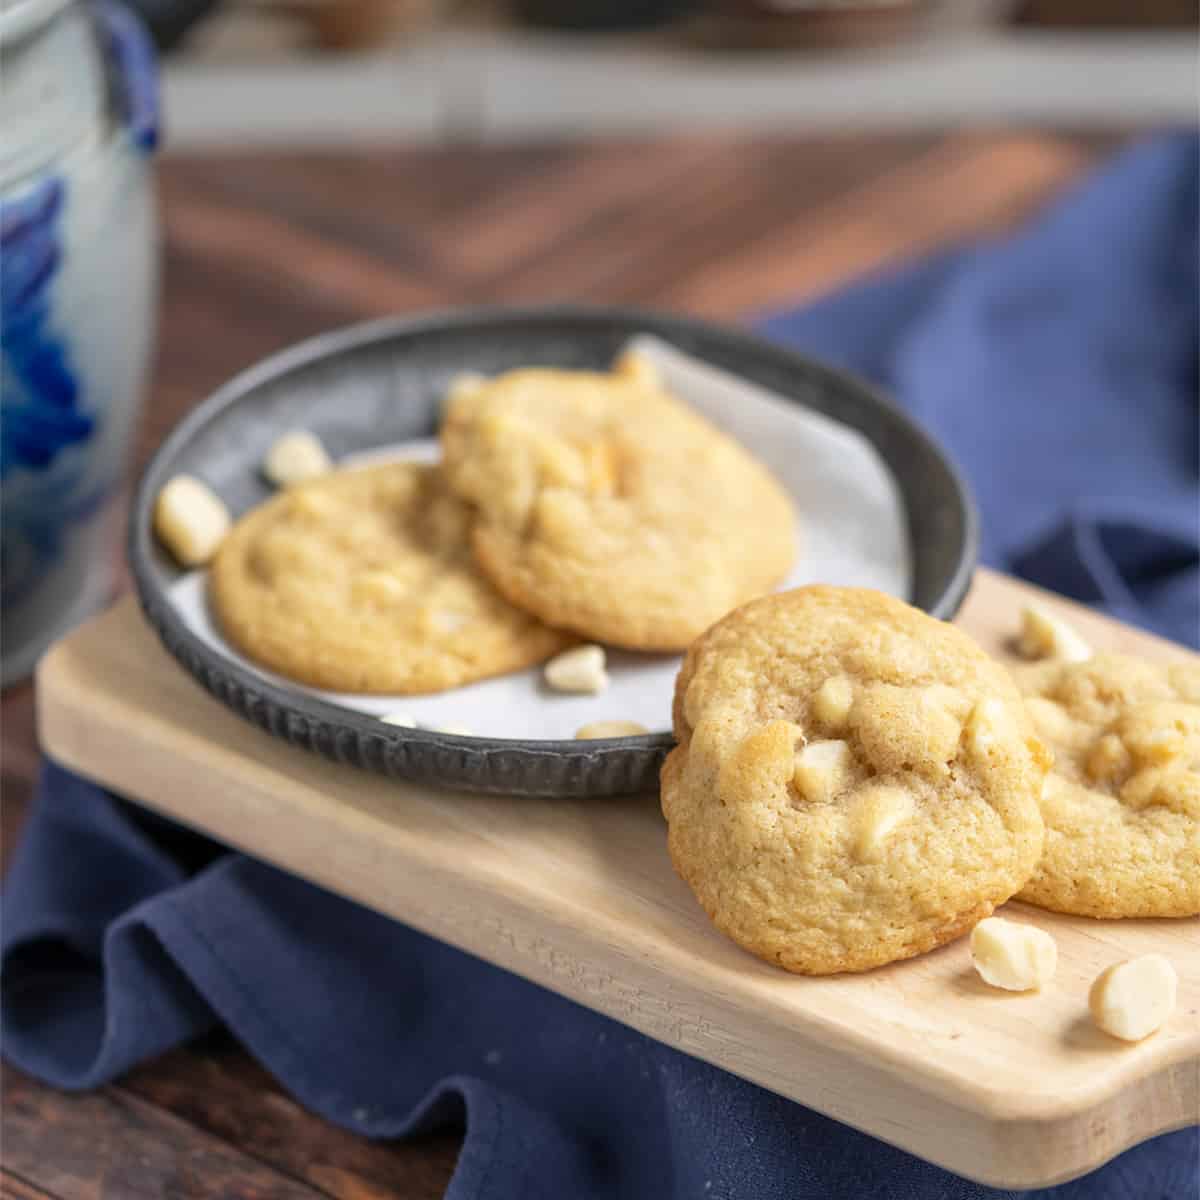 Four white chocolate macadamia nut cookies on a wooden board with a towel under it.